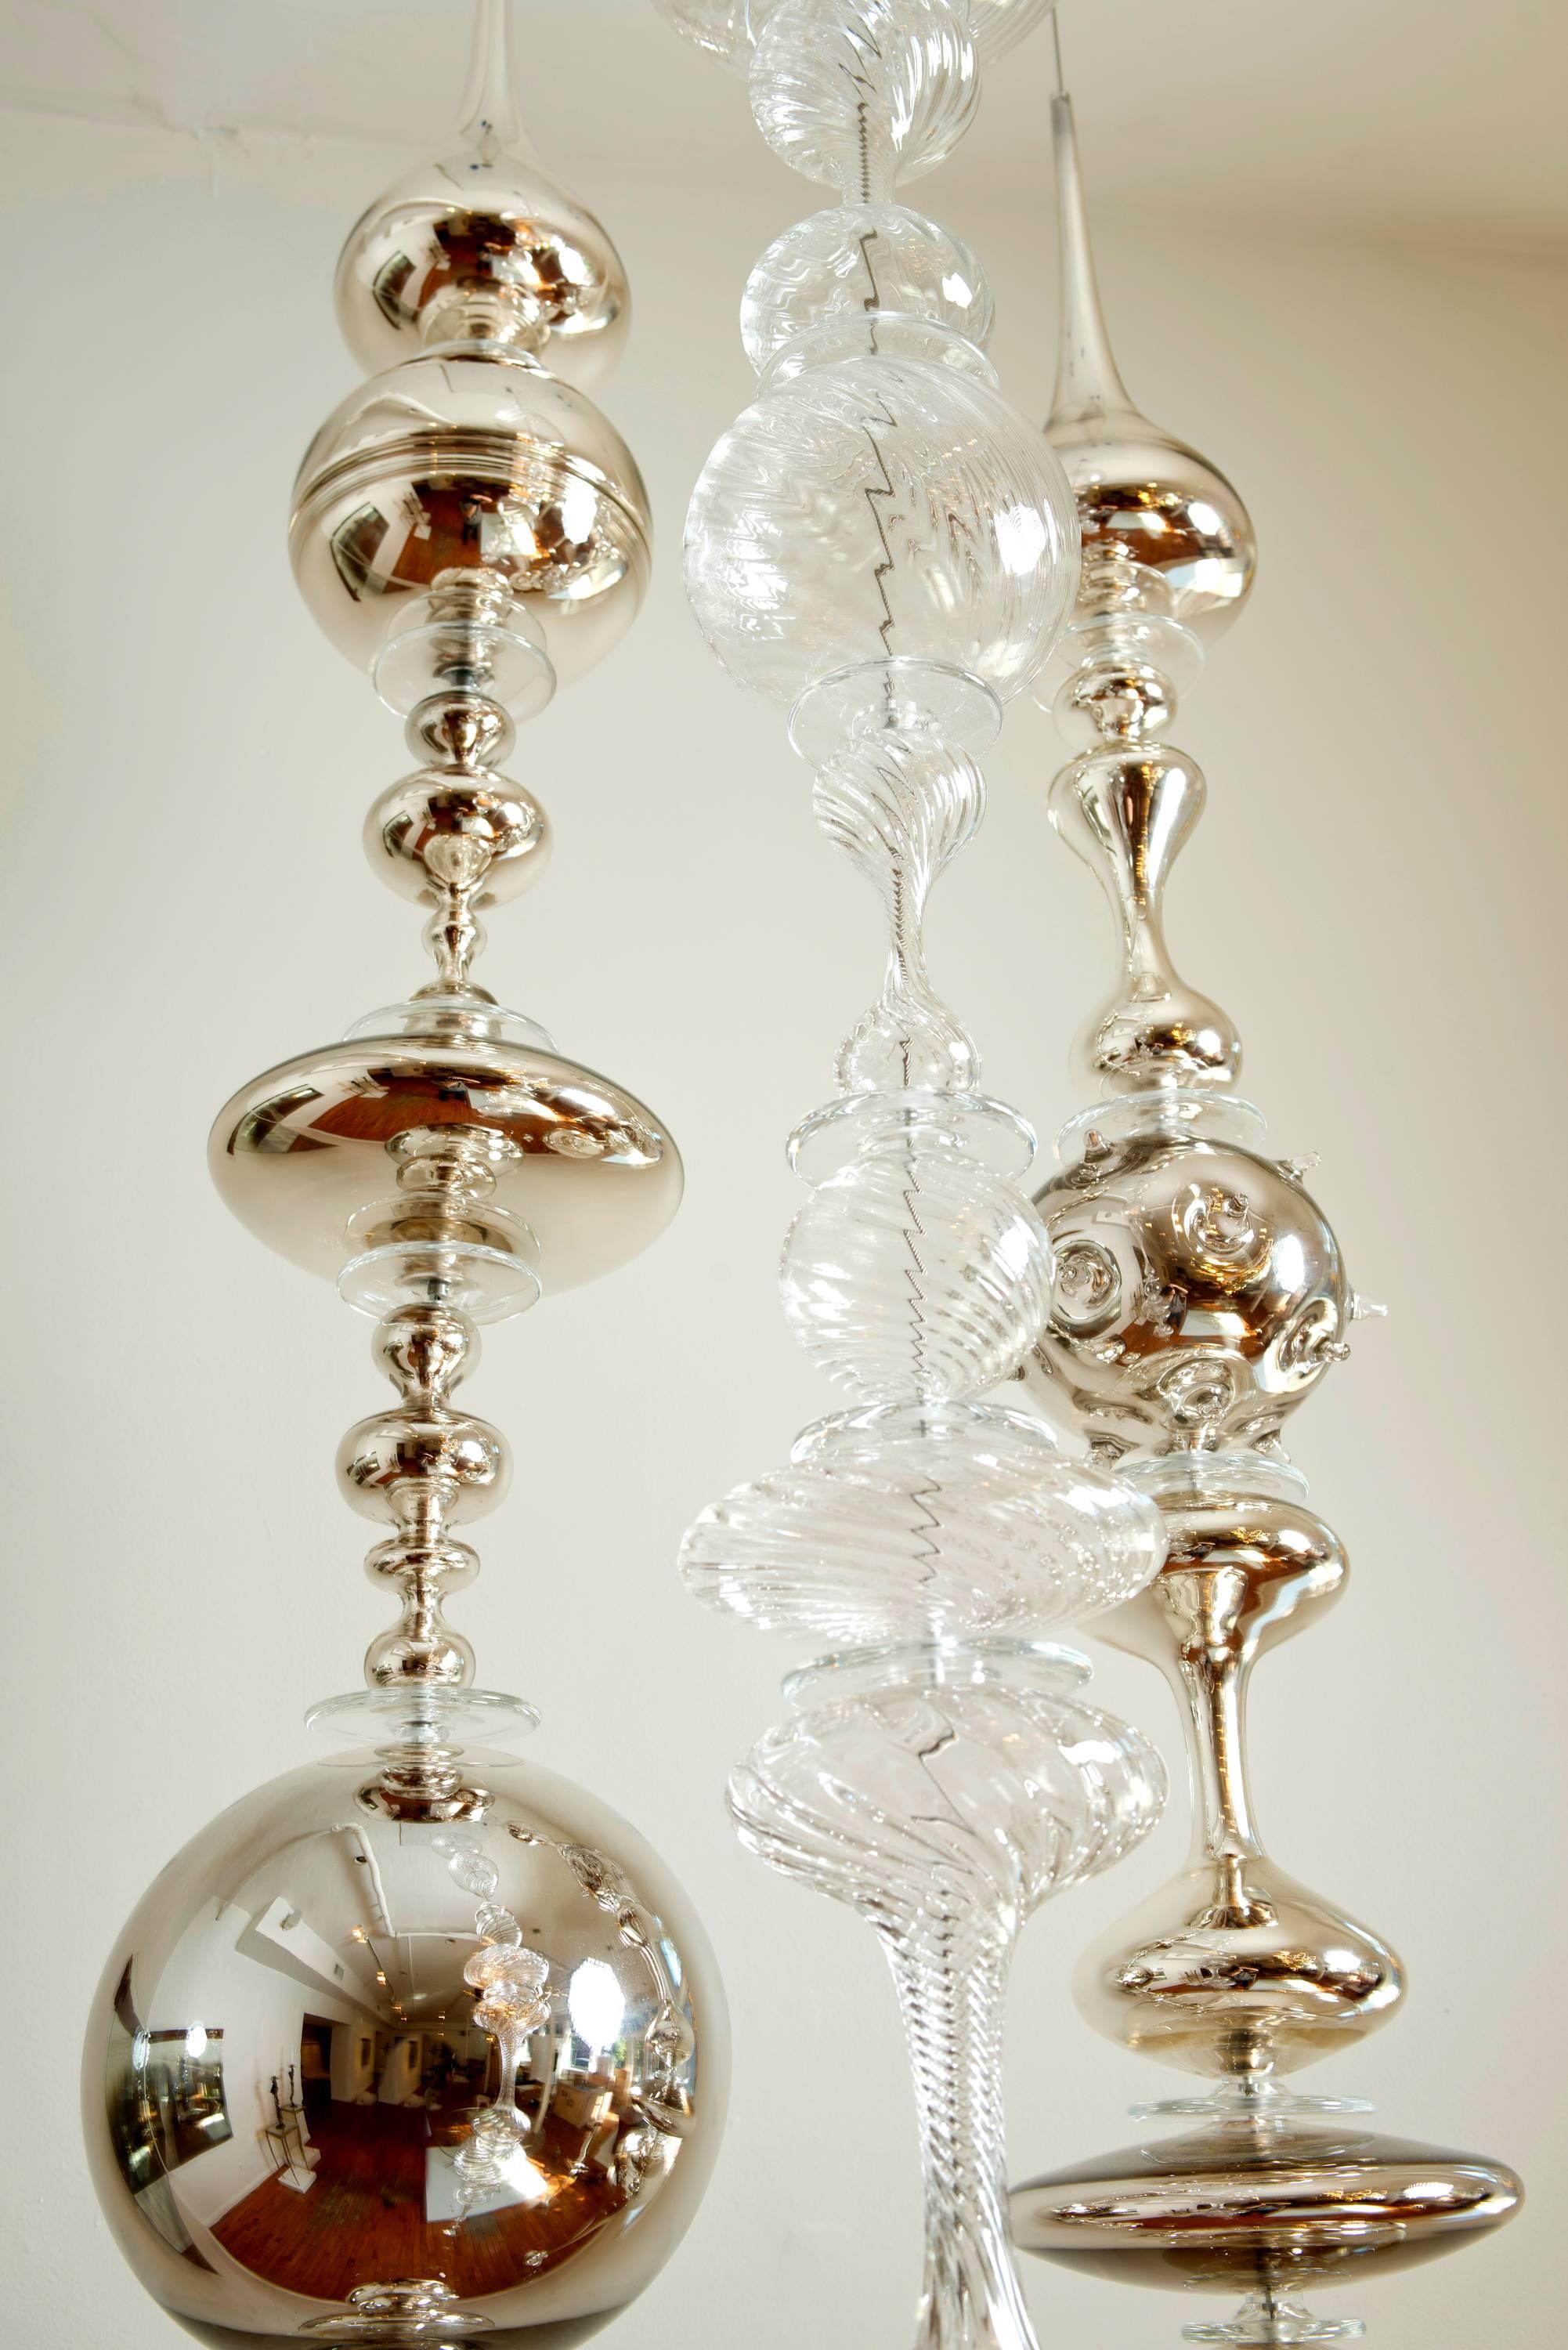 American Contemporary Compendant 2.1.16 Hanging Glass Sculpture